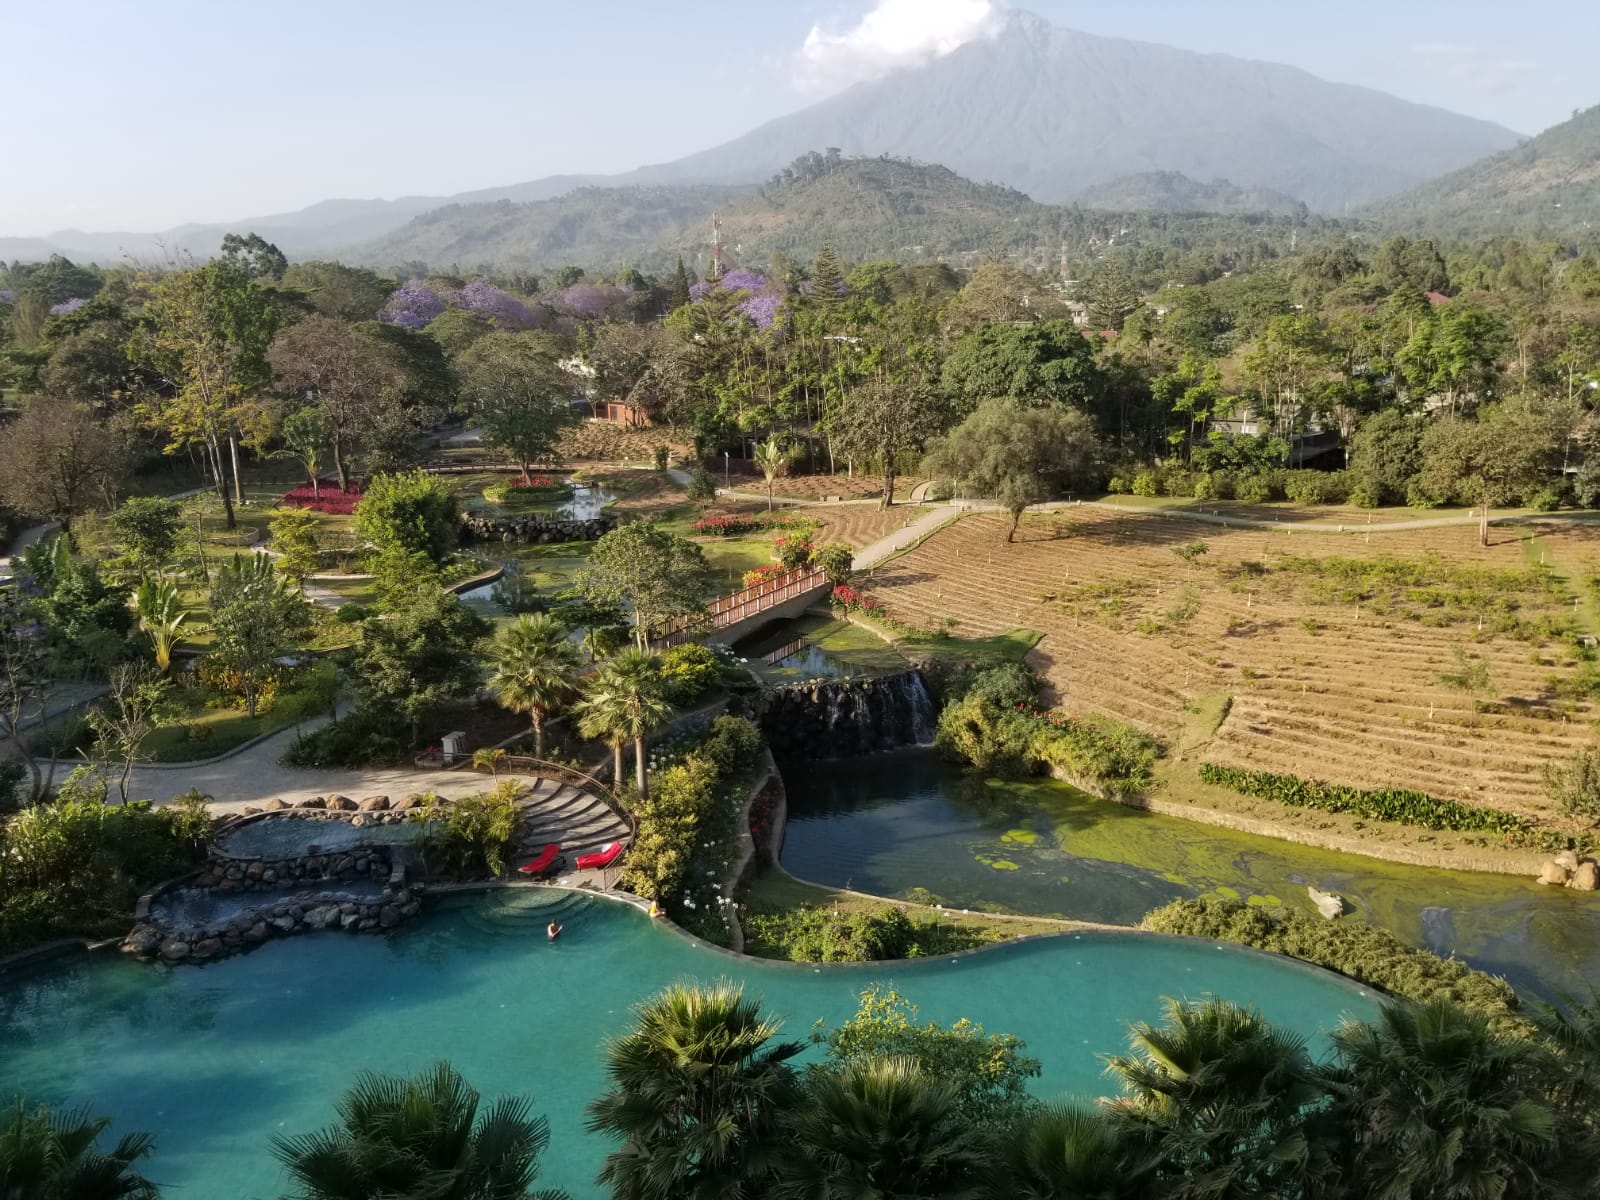 Landscape view of volcano and resort